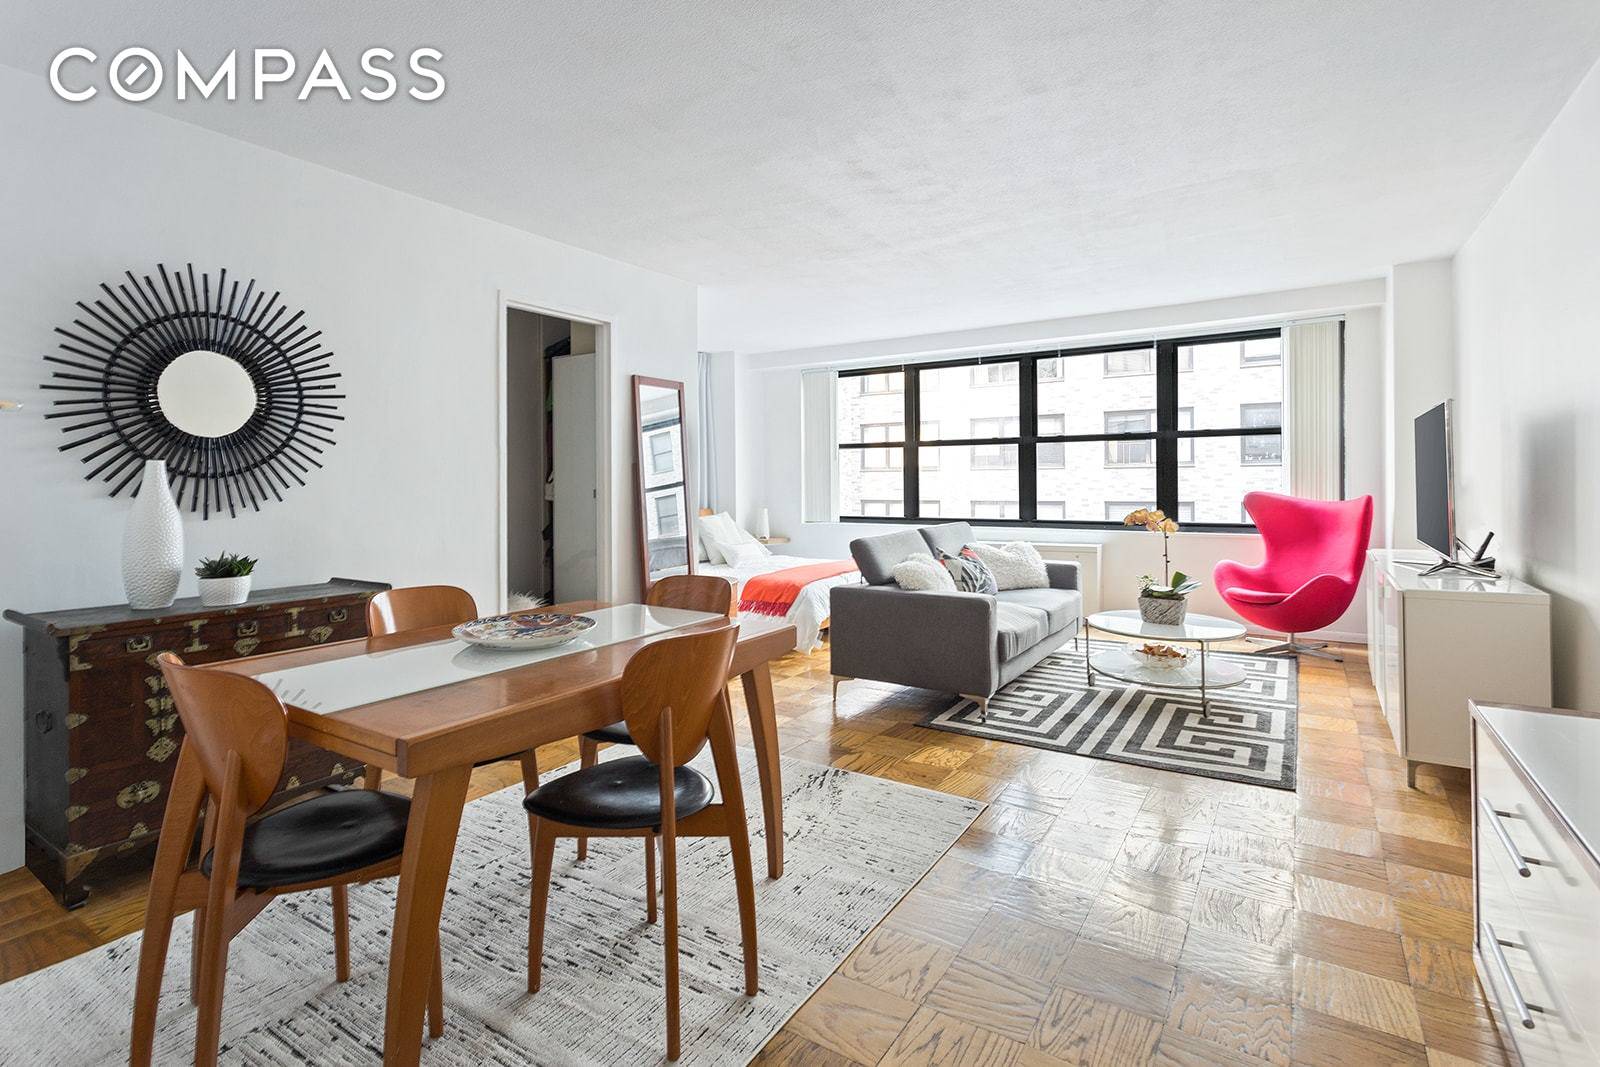 This renovated extra large alcove studio home is bright, quiet and centrally located, making it the perfect Midtown Manhattan home or pied a terre.